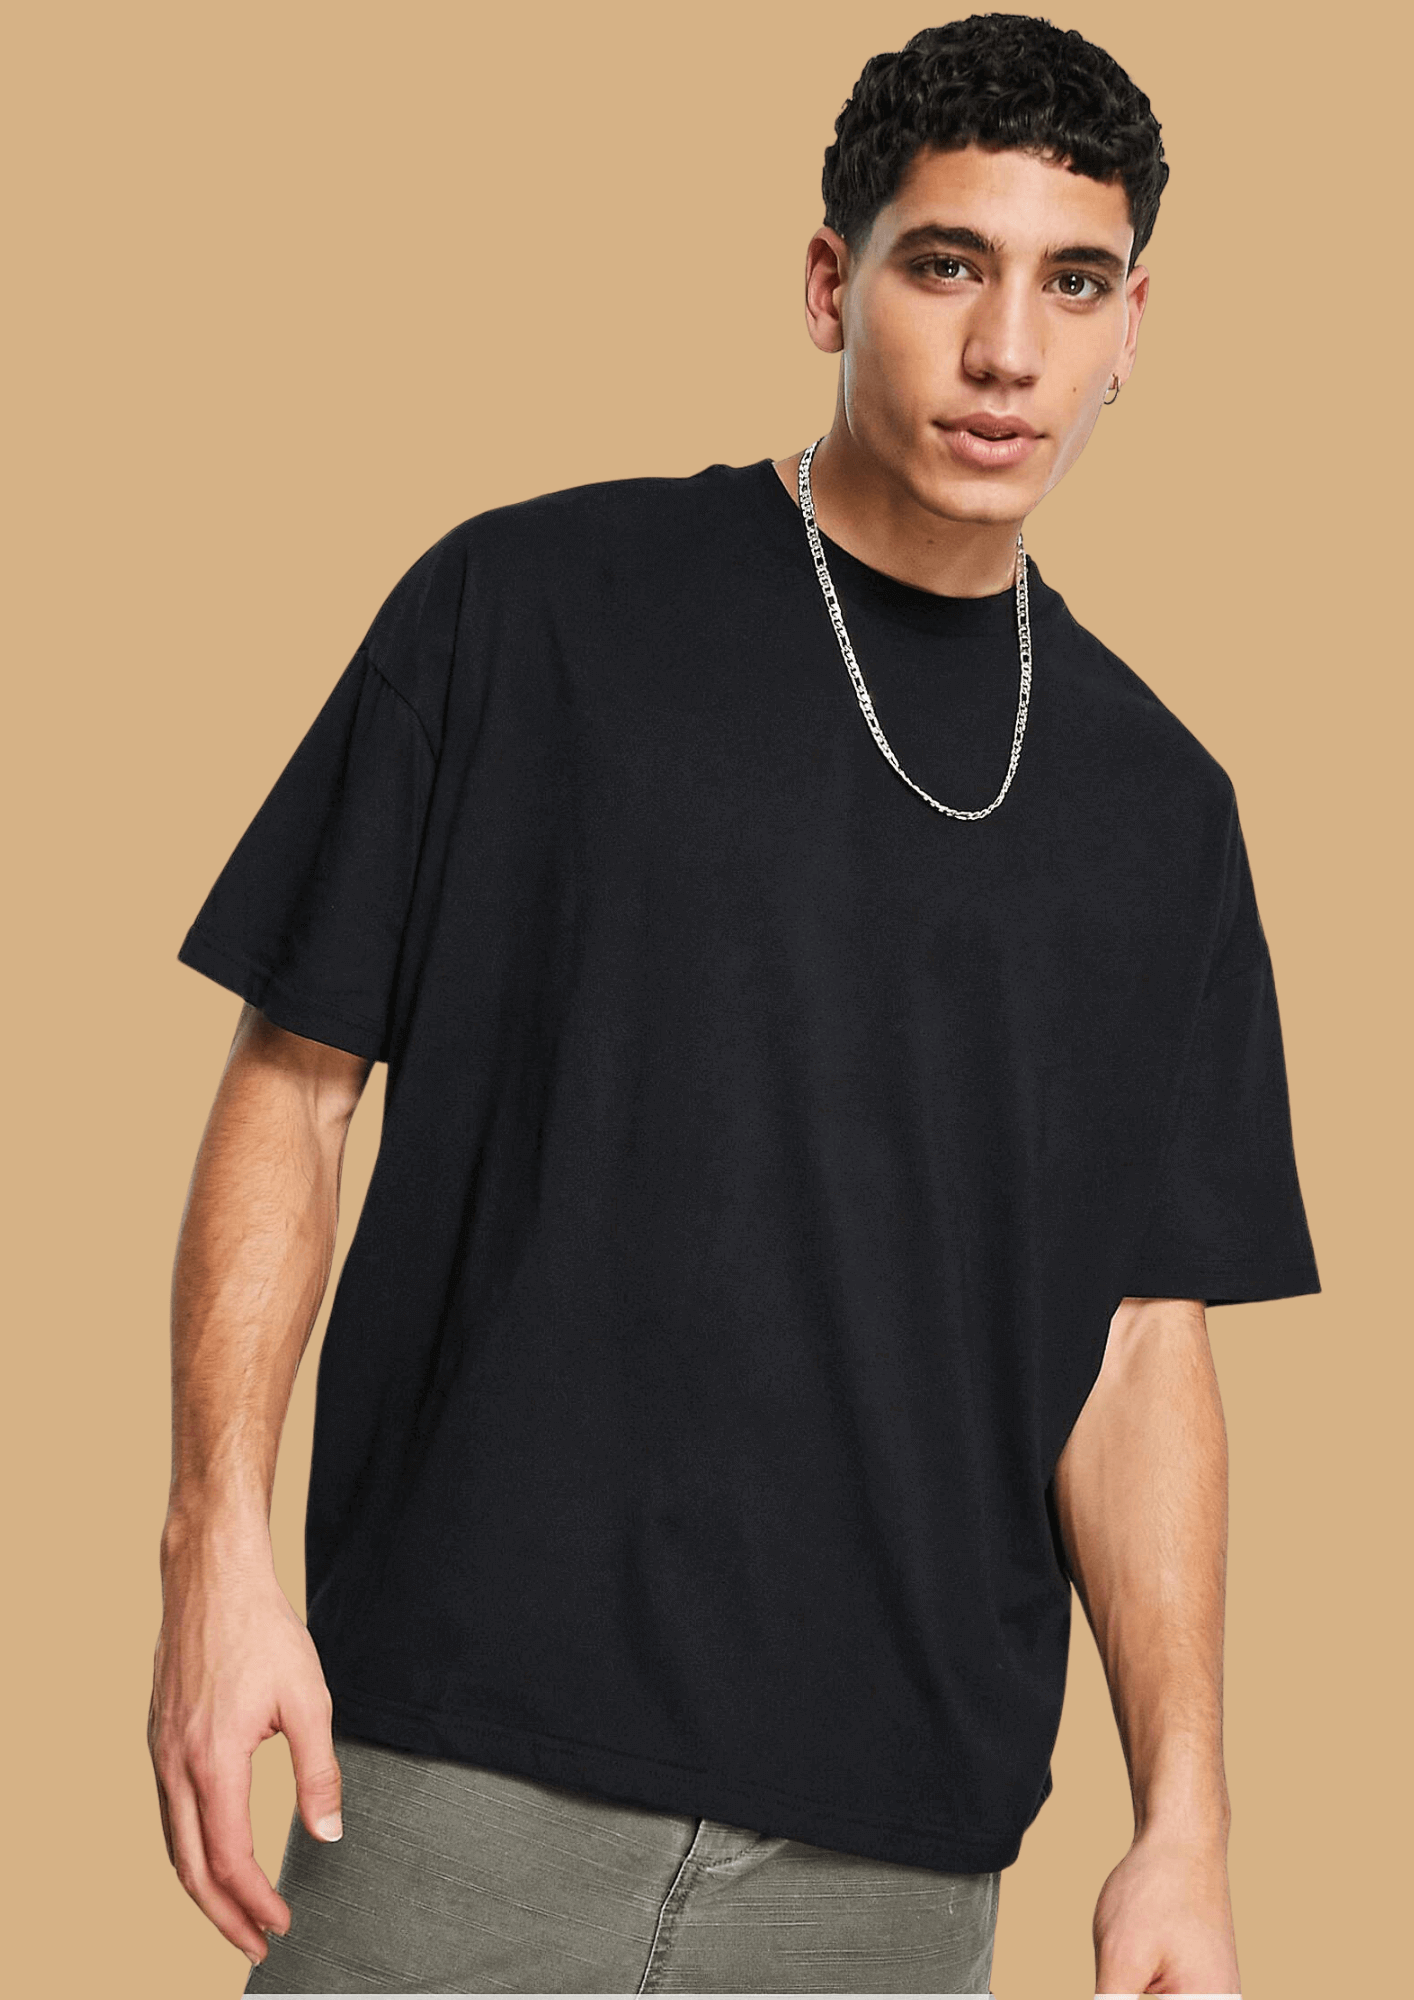 Pigeon printed black color oversized t-shirt